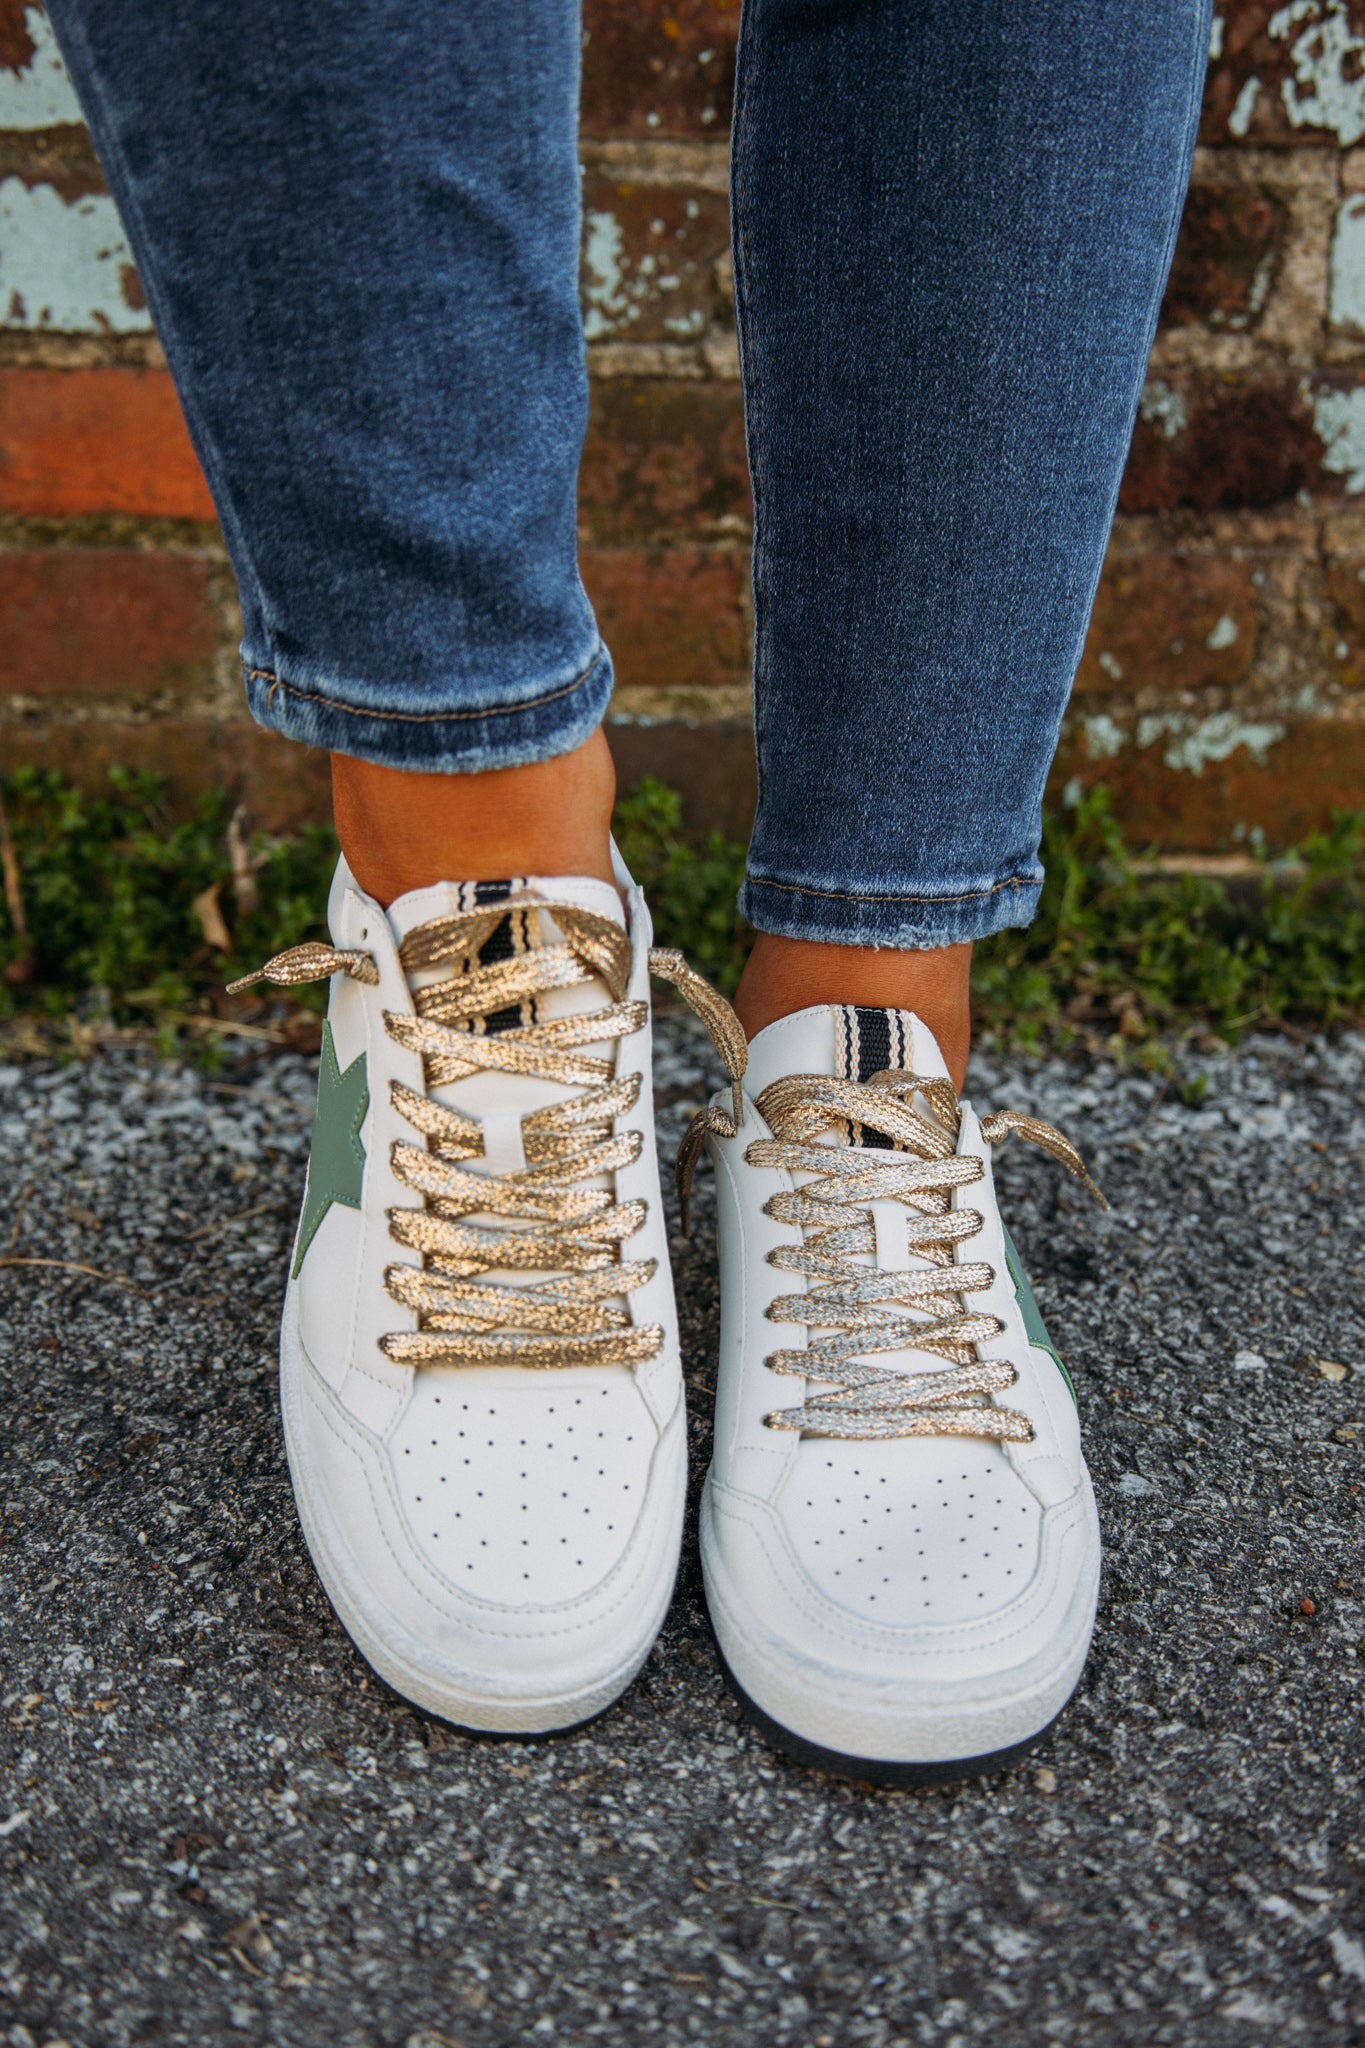 A classic shoe that is a staple! The white Paz Sneaker features a green star and gold sparkle heel tab. So trendy and super comfortable for everyday wear! These are perfect for a casual day of running errands or super cute dressed up for a casual date!